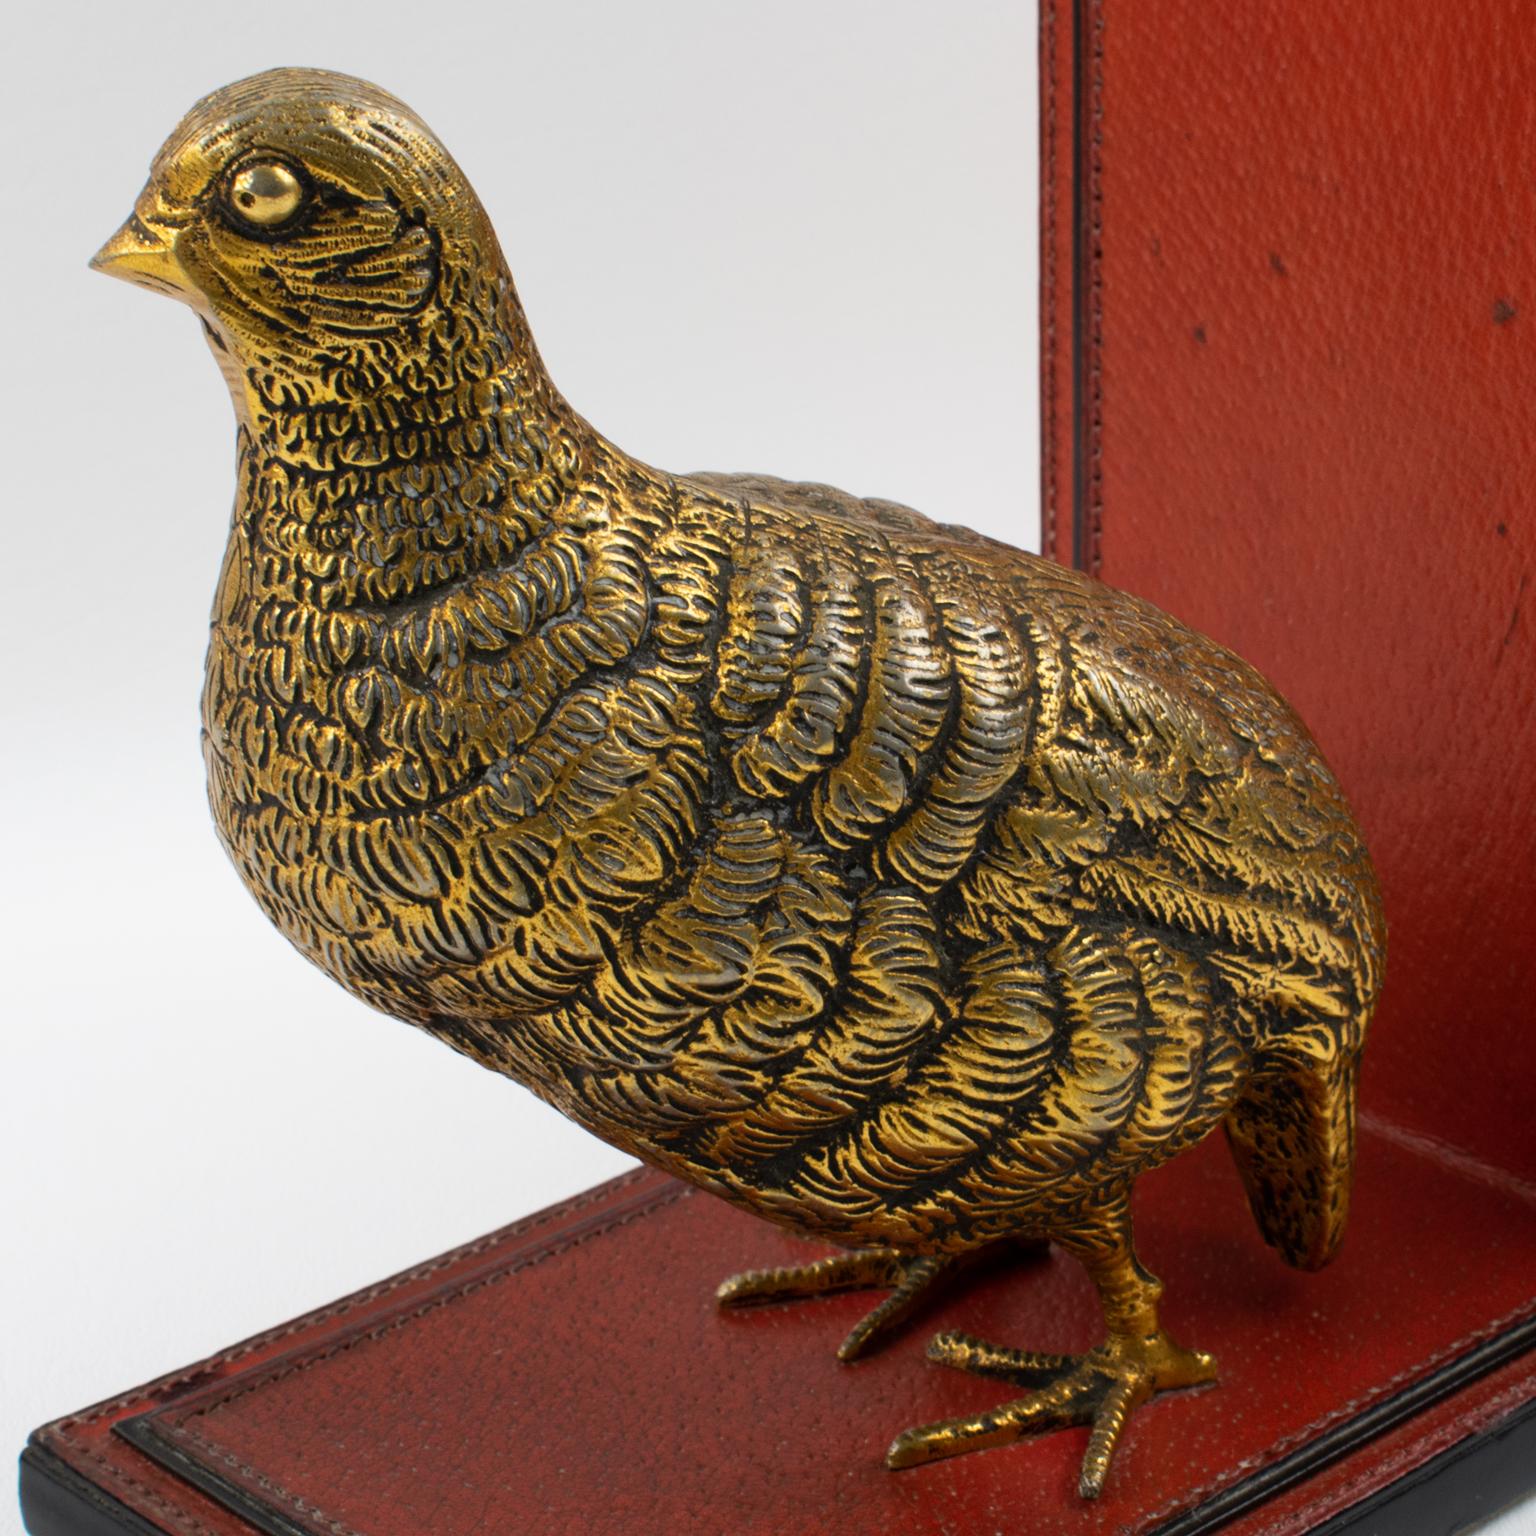 Gucci Italy Hand-Stitched Red Leather Bookends with Gilt Metal Partridges, 1970s For Sale 2